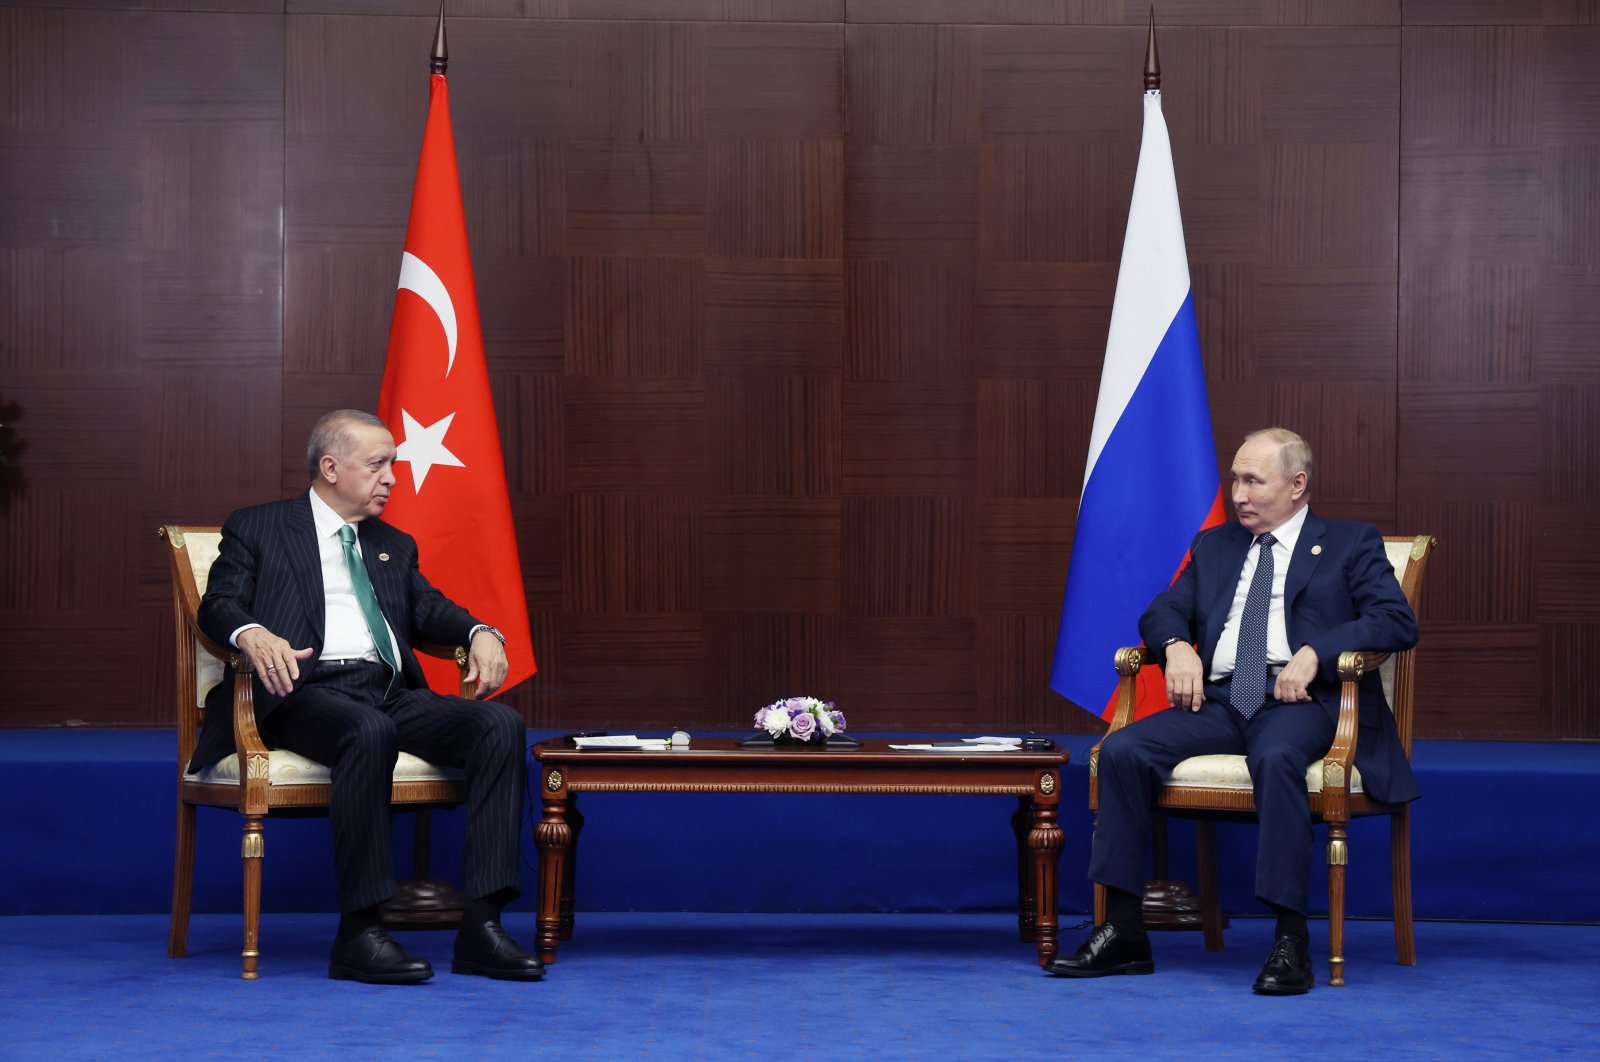 President Recep Tayyip Erdoğan attends a meeting with Russian President Vladimir Putin (R) on the sidelines of the 6th Summit of the Conference on Interaction and Confidence Building Measures in Asia (CICA) in Astana, Kazakhstan, 13 October 2022. (EPA Photo)